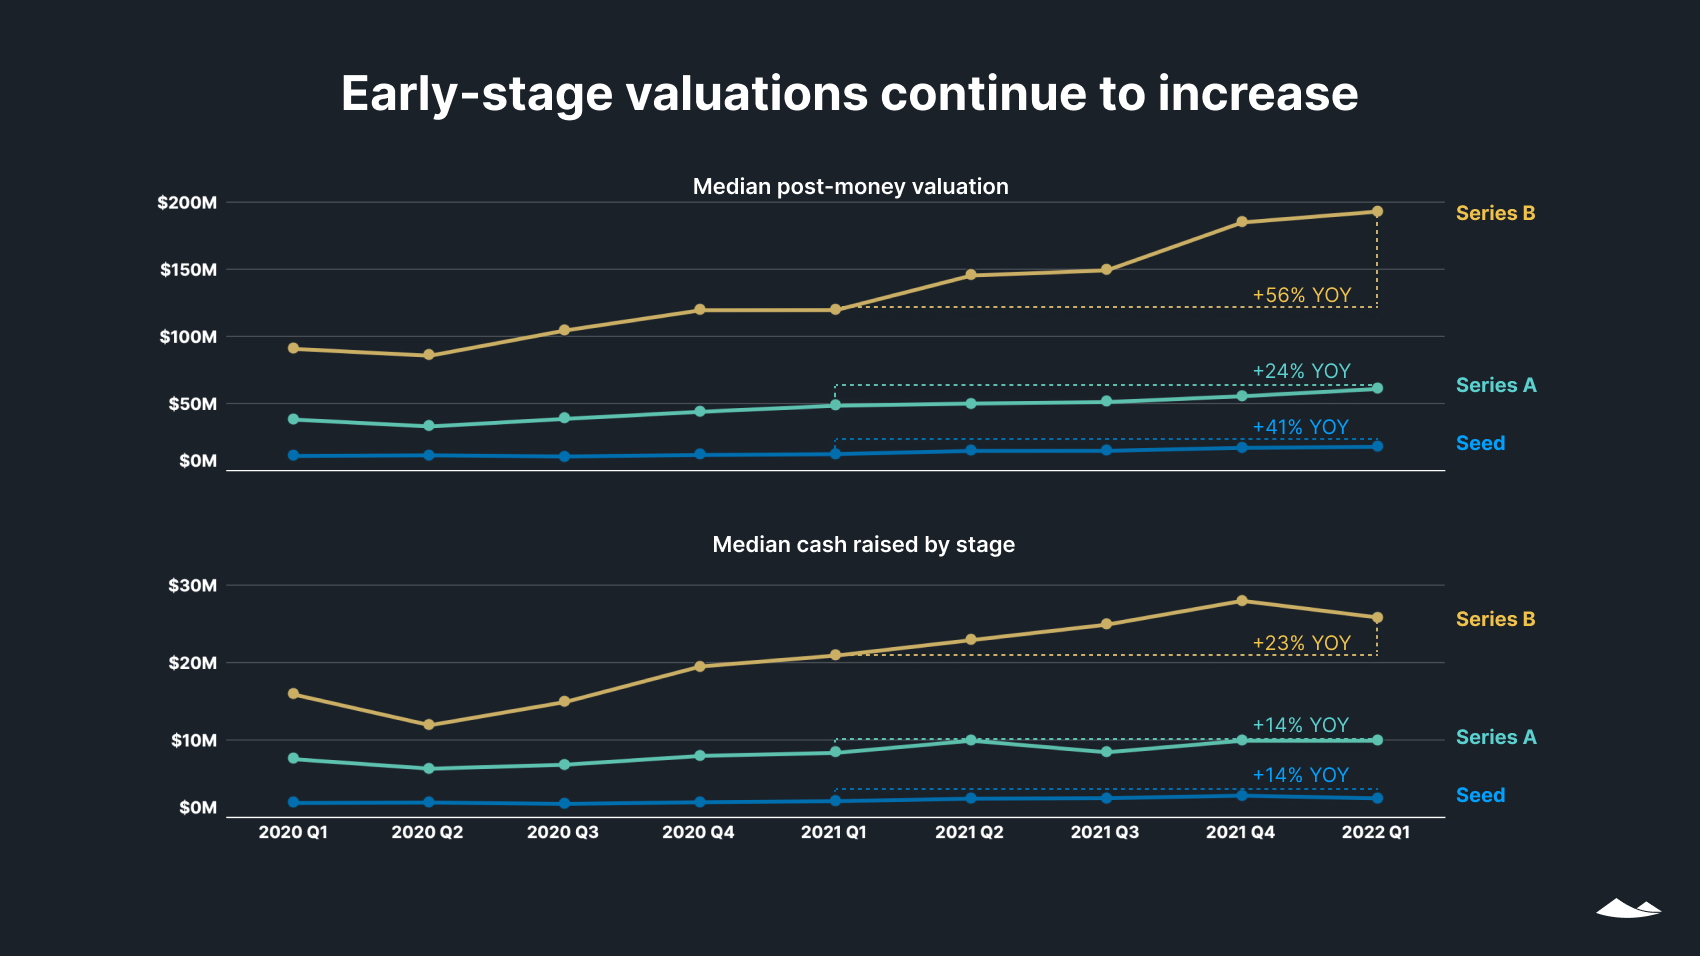 Early stage valuations continue to increase